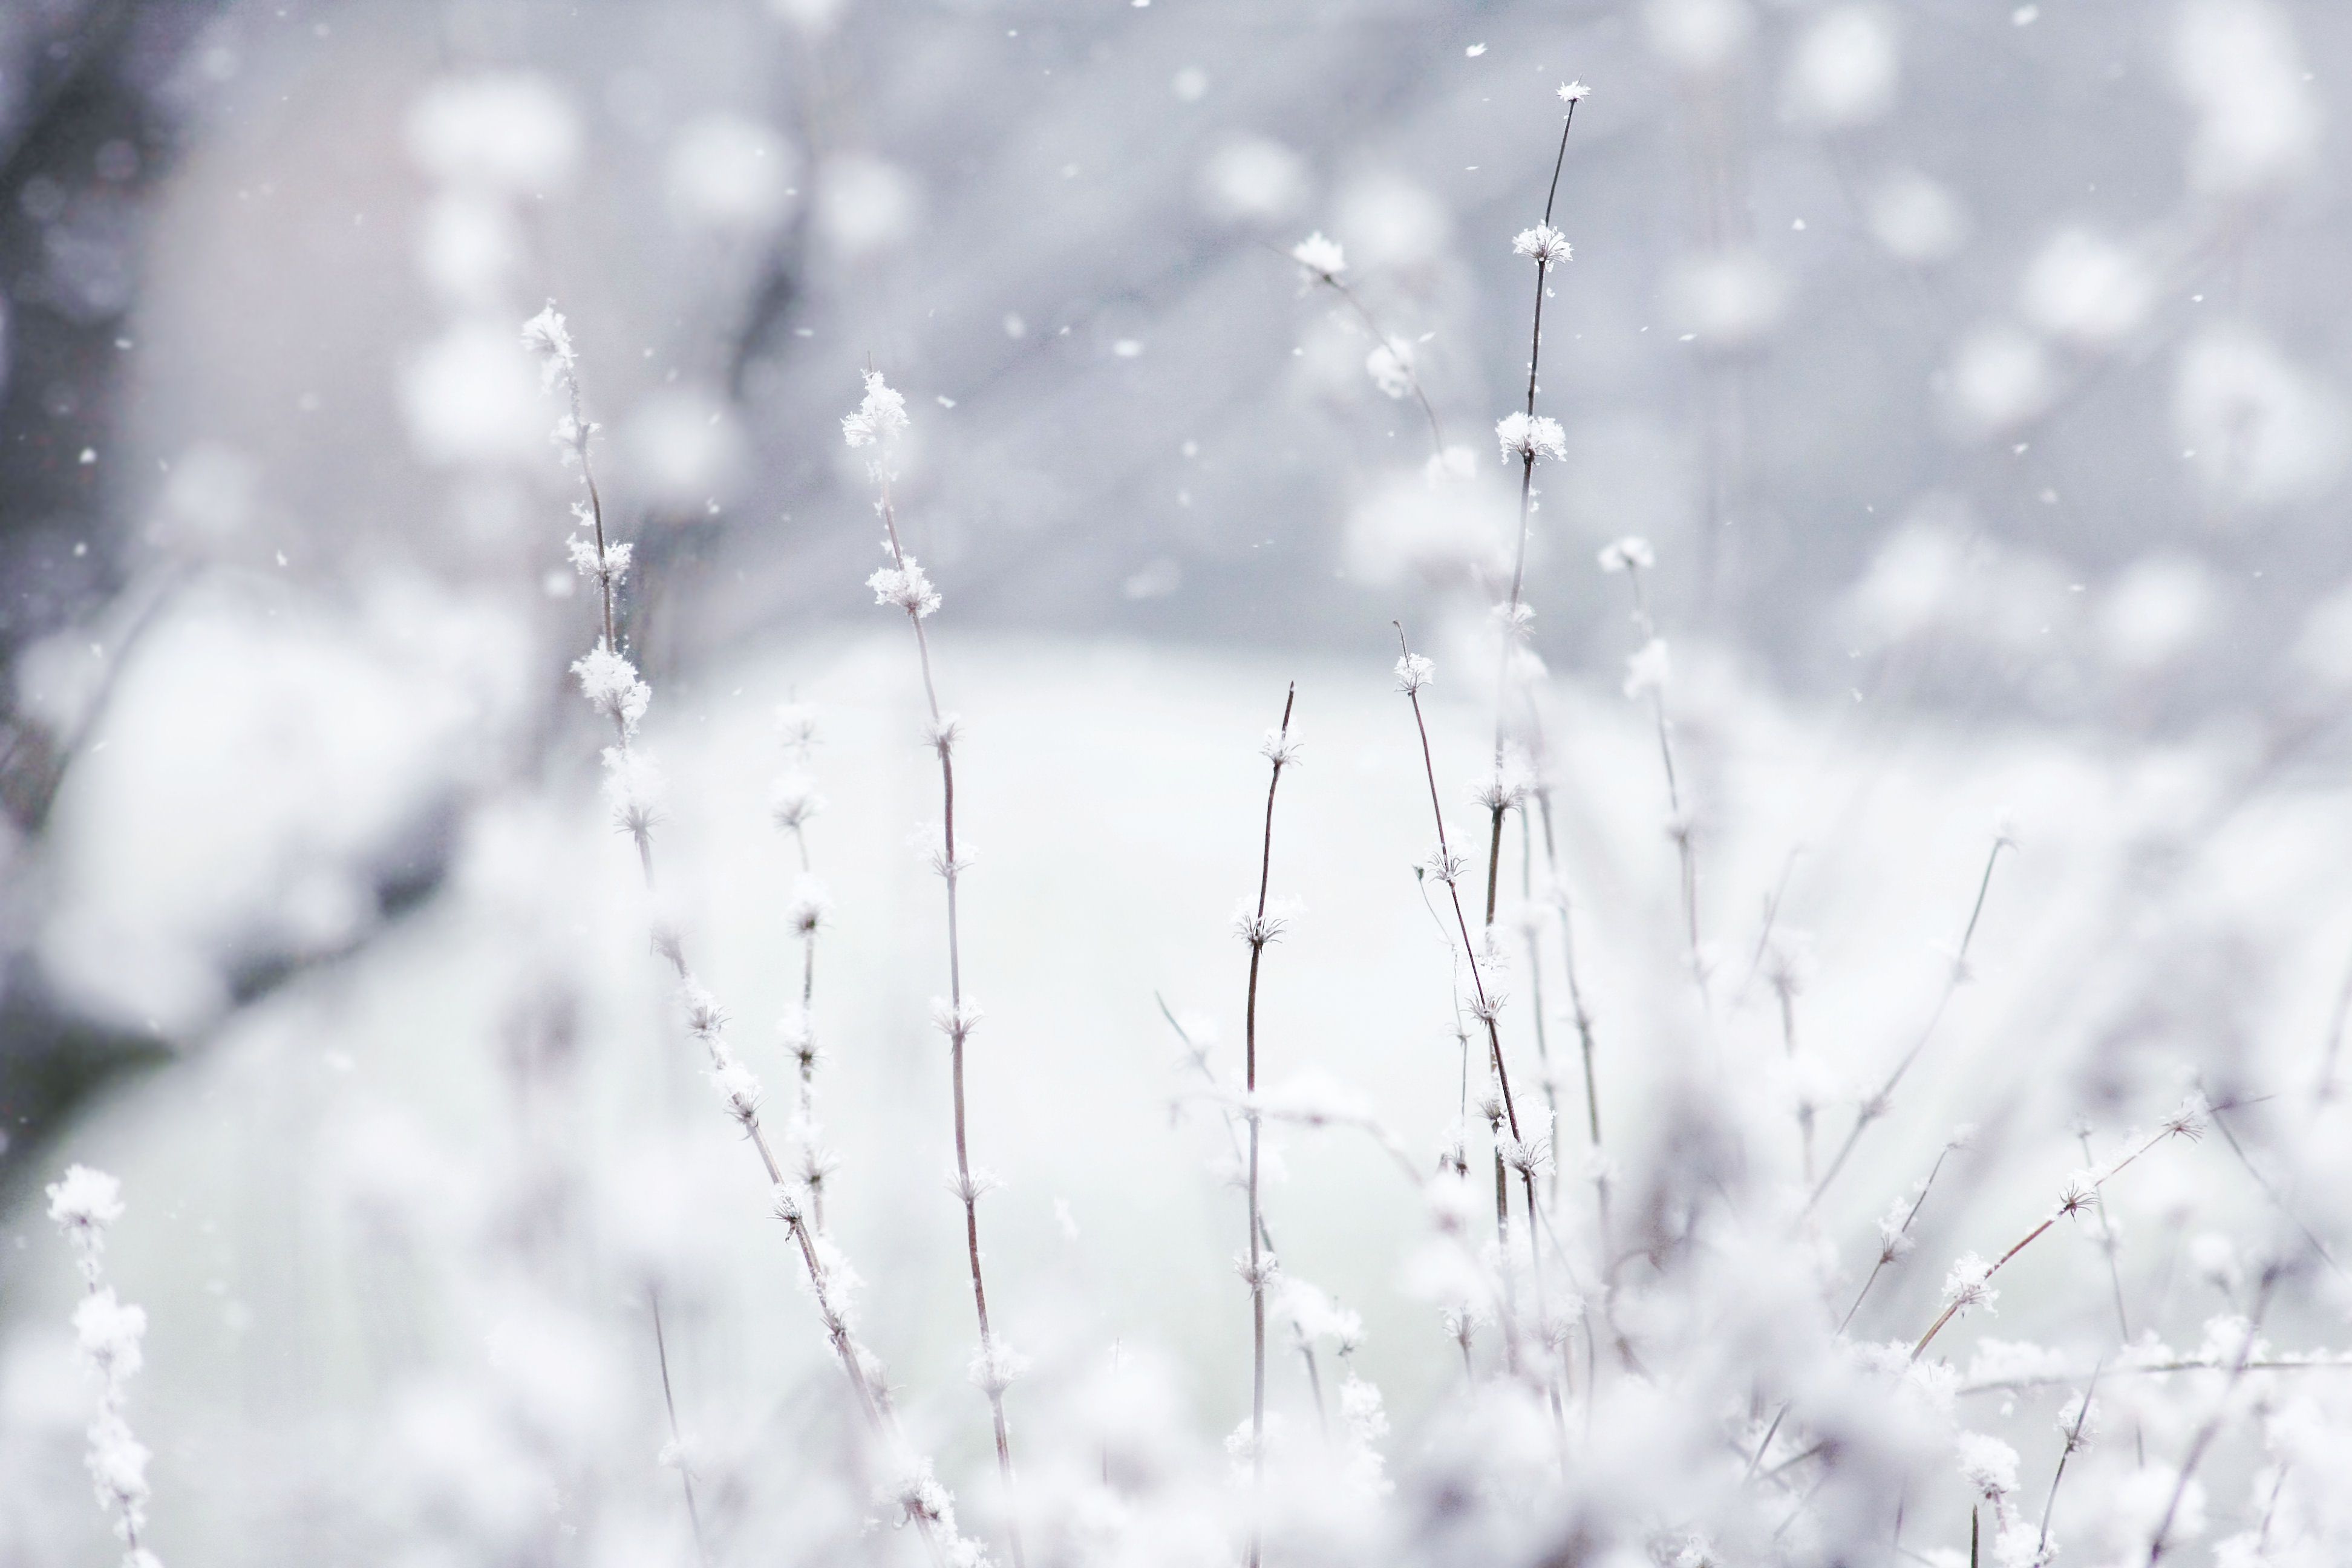 Winter Snow Backgrounds Wallpapers, Backgrounds, Images, Art Photos